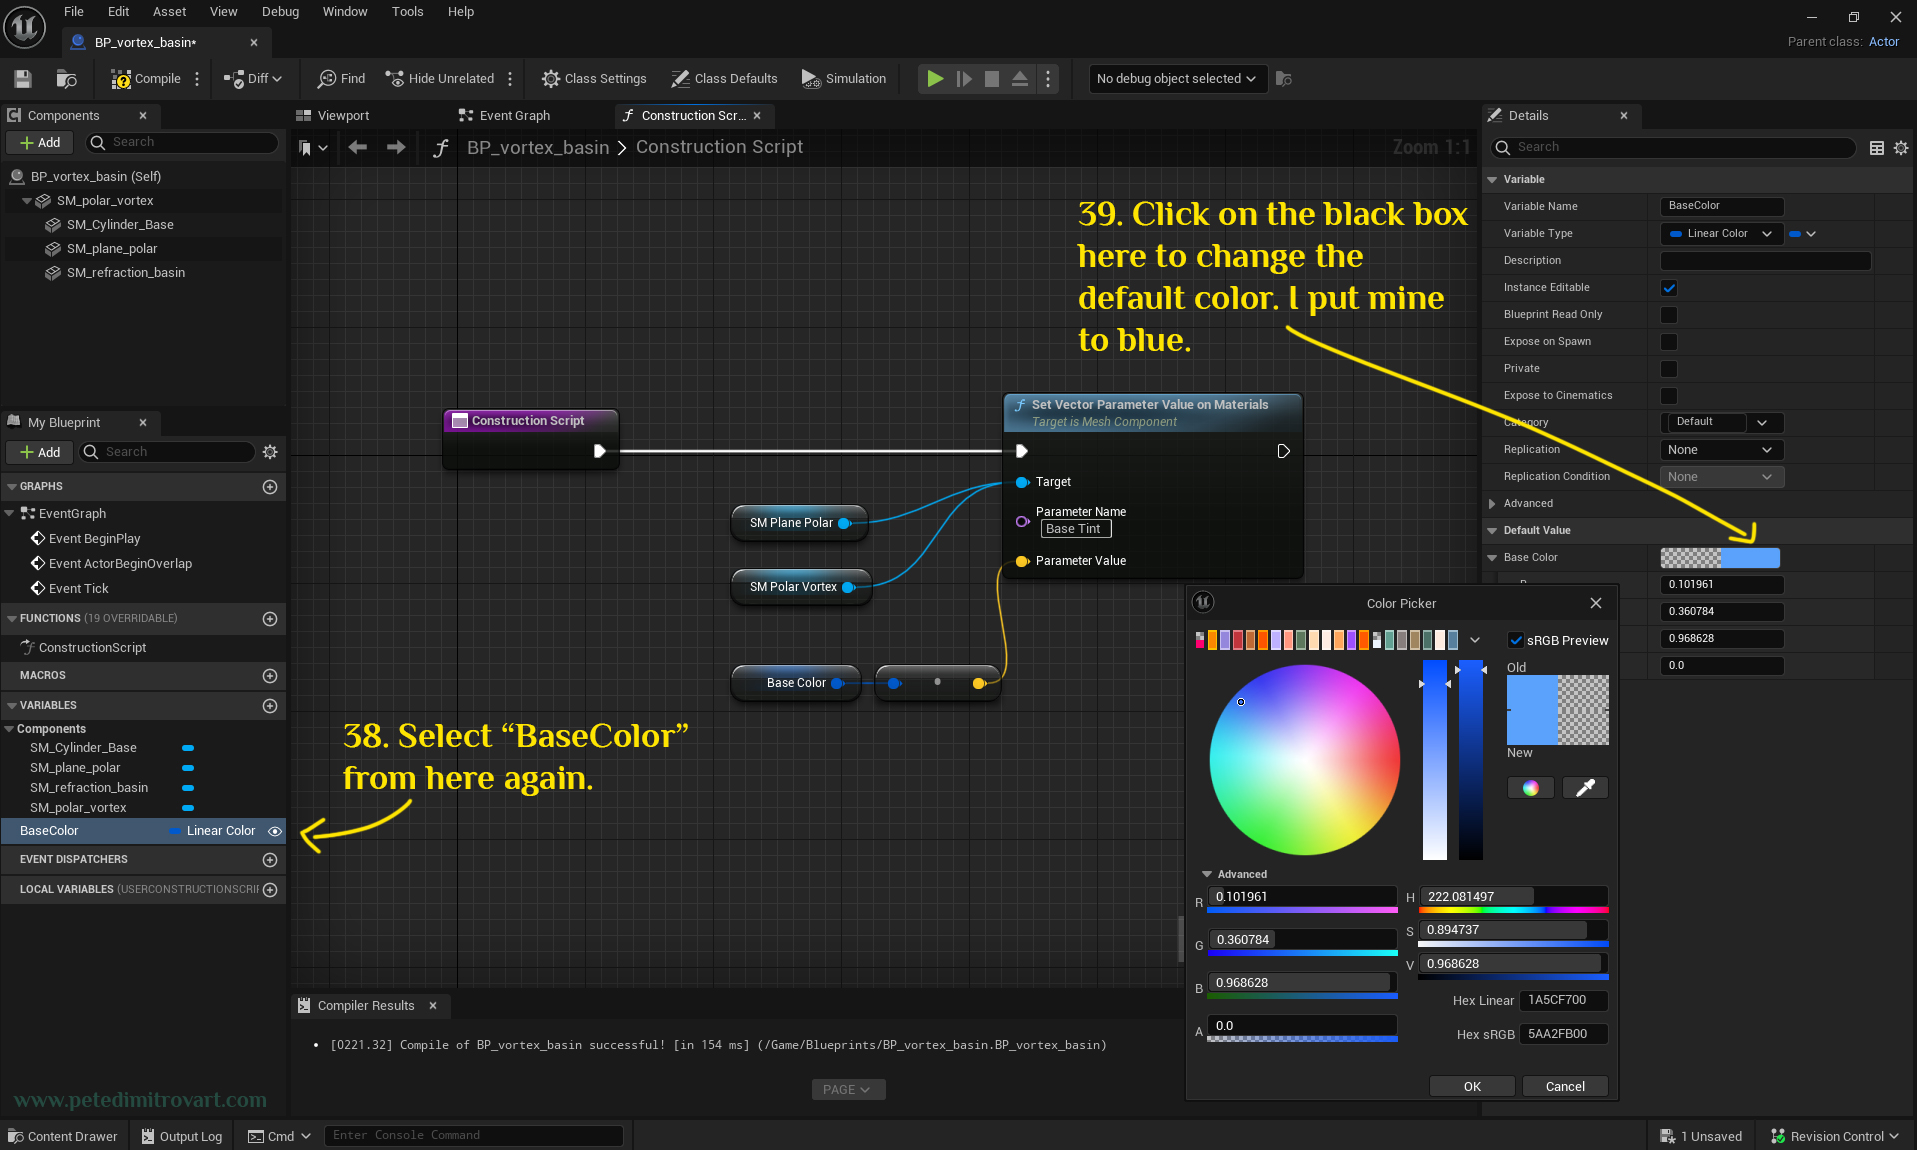 Another screenshot that now shows the Base Color selected and its right hand side settings change. The black box there is clicked and then change to a bright blue color, using a color picker seen in the image.